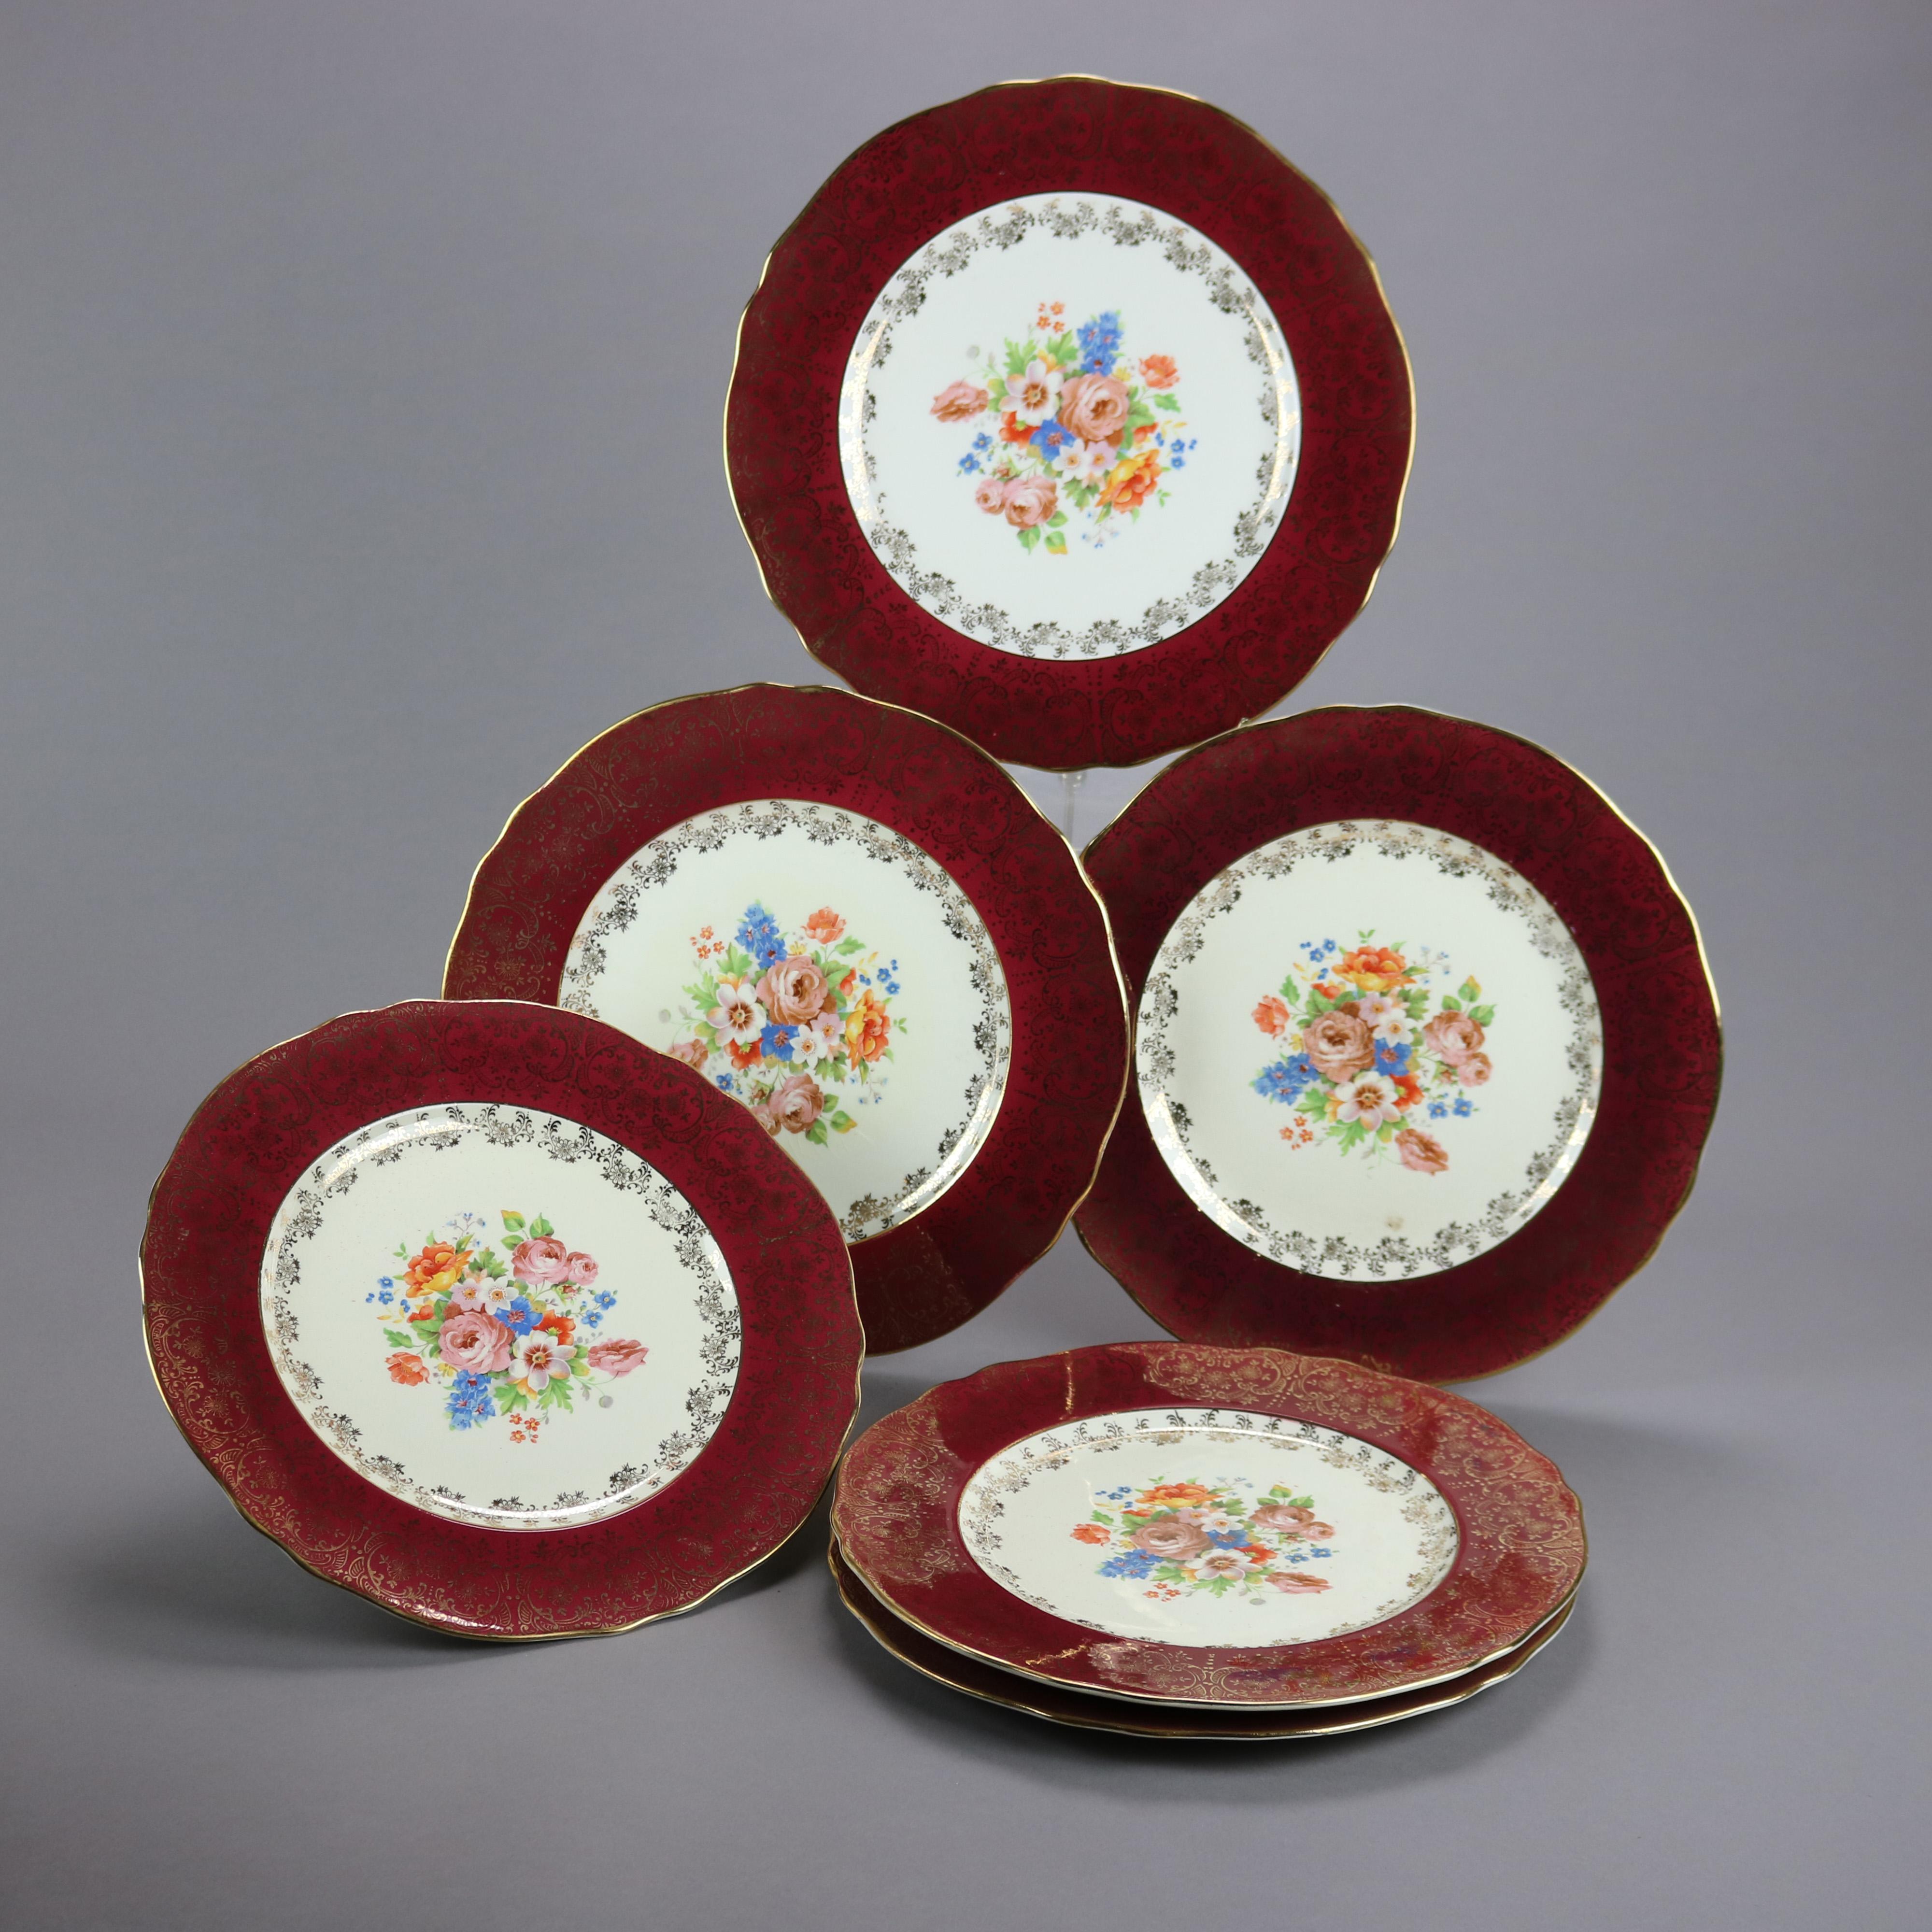 A set of six dinner plates by Atlas China offer porcelain construction with well having floral bouquet and burgundy rim with foliate and scroll gilt decoration, maker stamp on bases as photographed, 20th century

Measures - 1''H X 11''W X